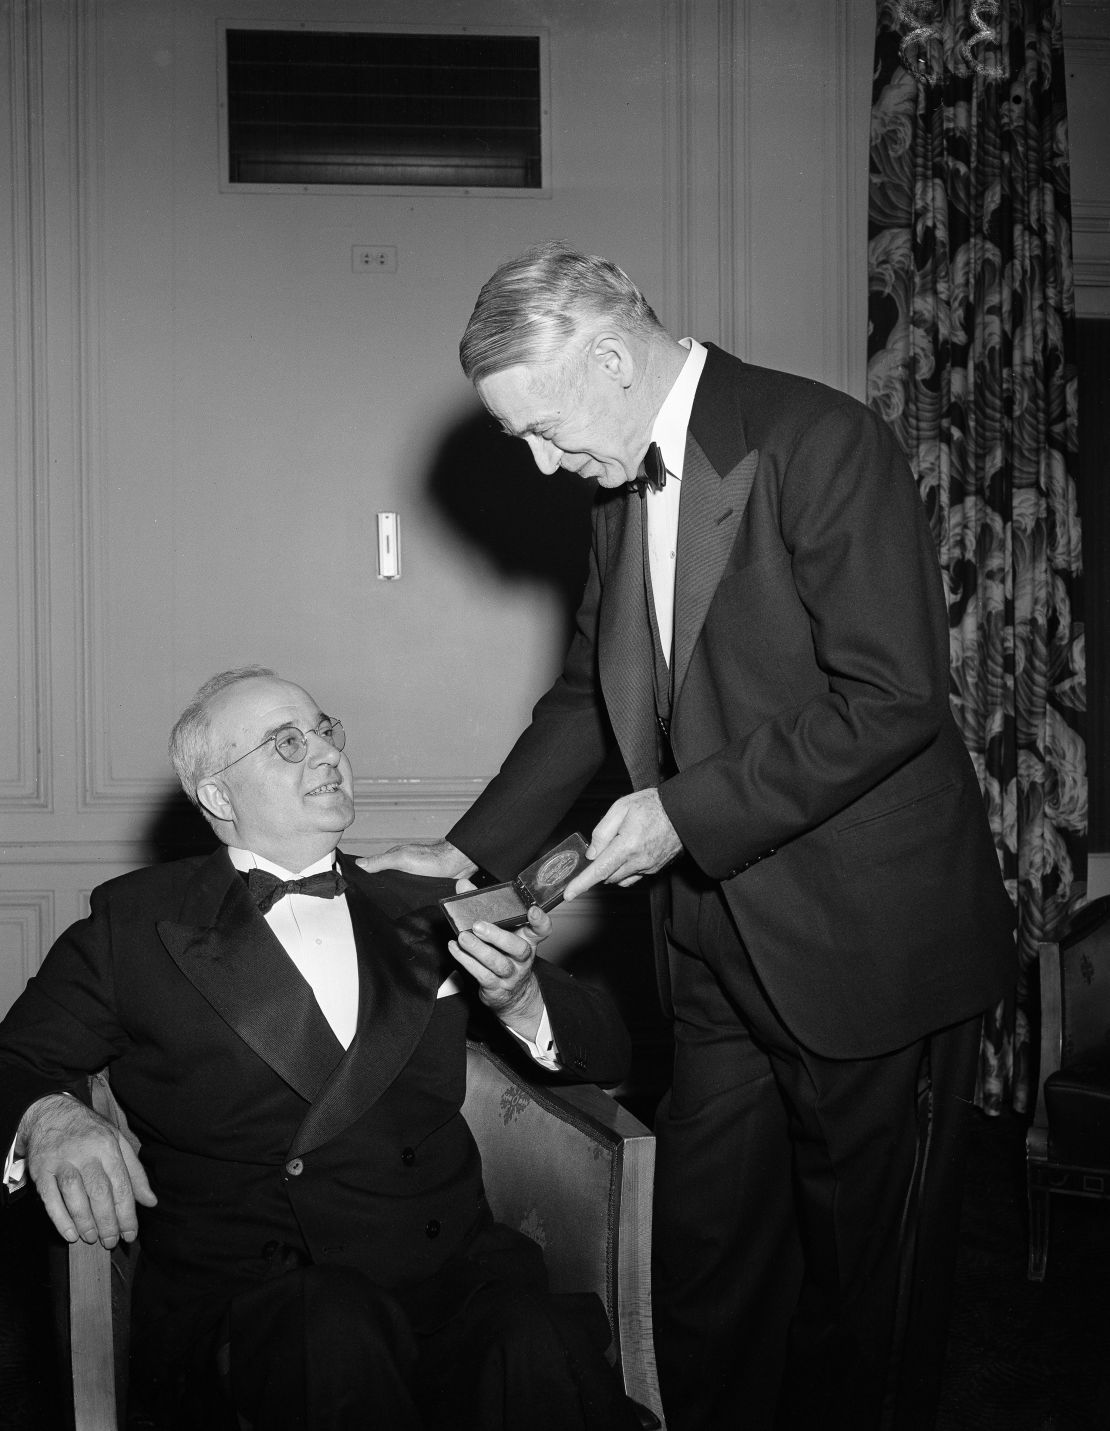 Midgley, who contracted polio in 1940, saw several honors in the last years of his life. Here, he receives the Willard Gibbs Award from the Chicago section of the American Chemical Society in 1942.